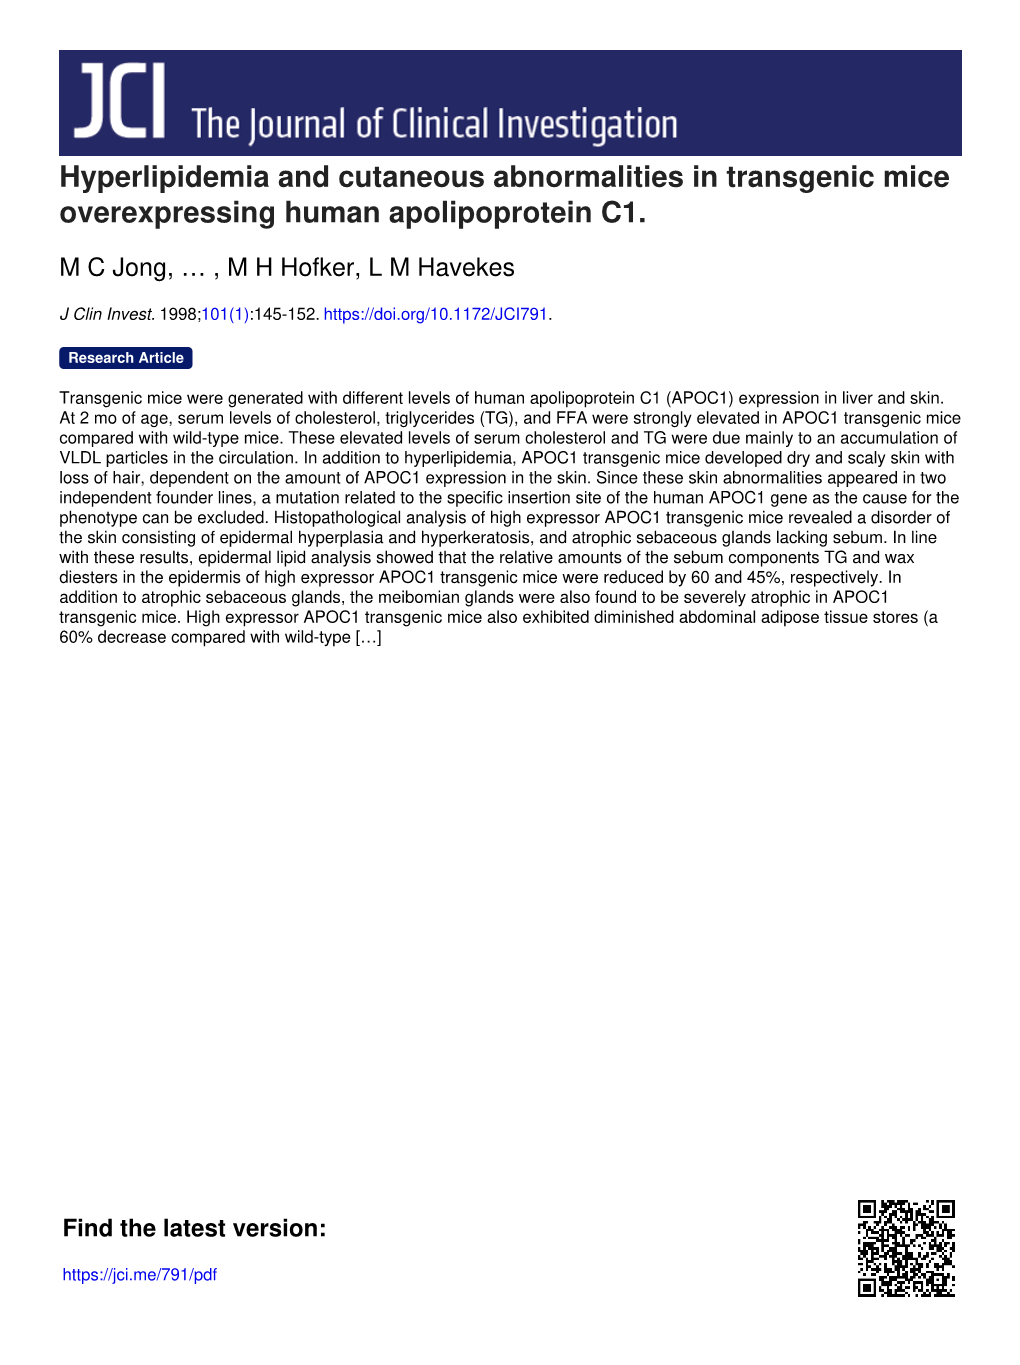 Hyperlipidemia and Cutaneous Abnormalities in Transgenic Mice Overexpressing Human Apolipoprotein C1